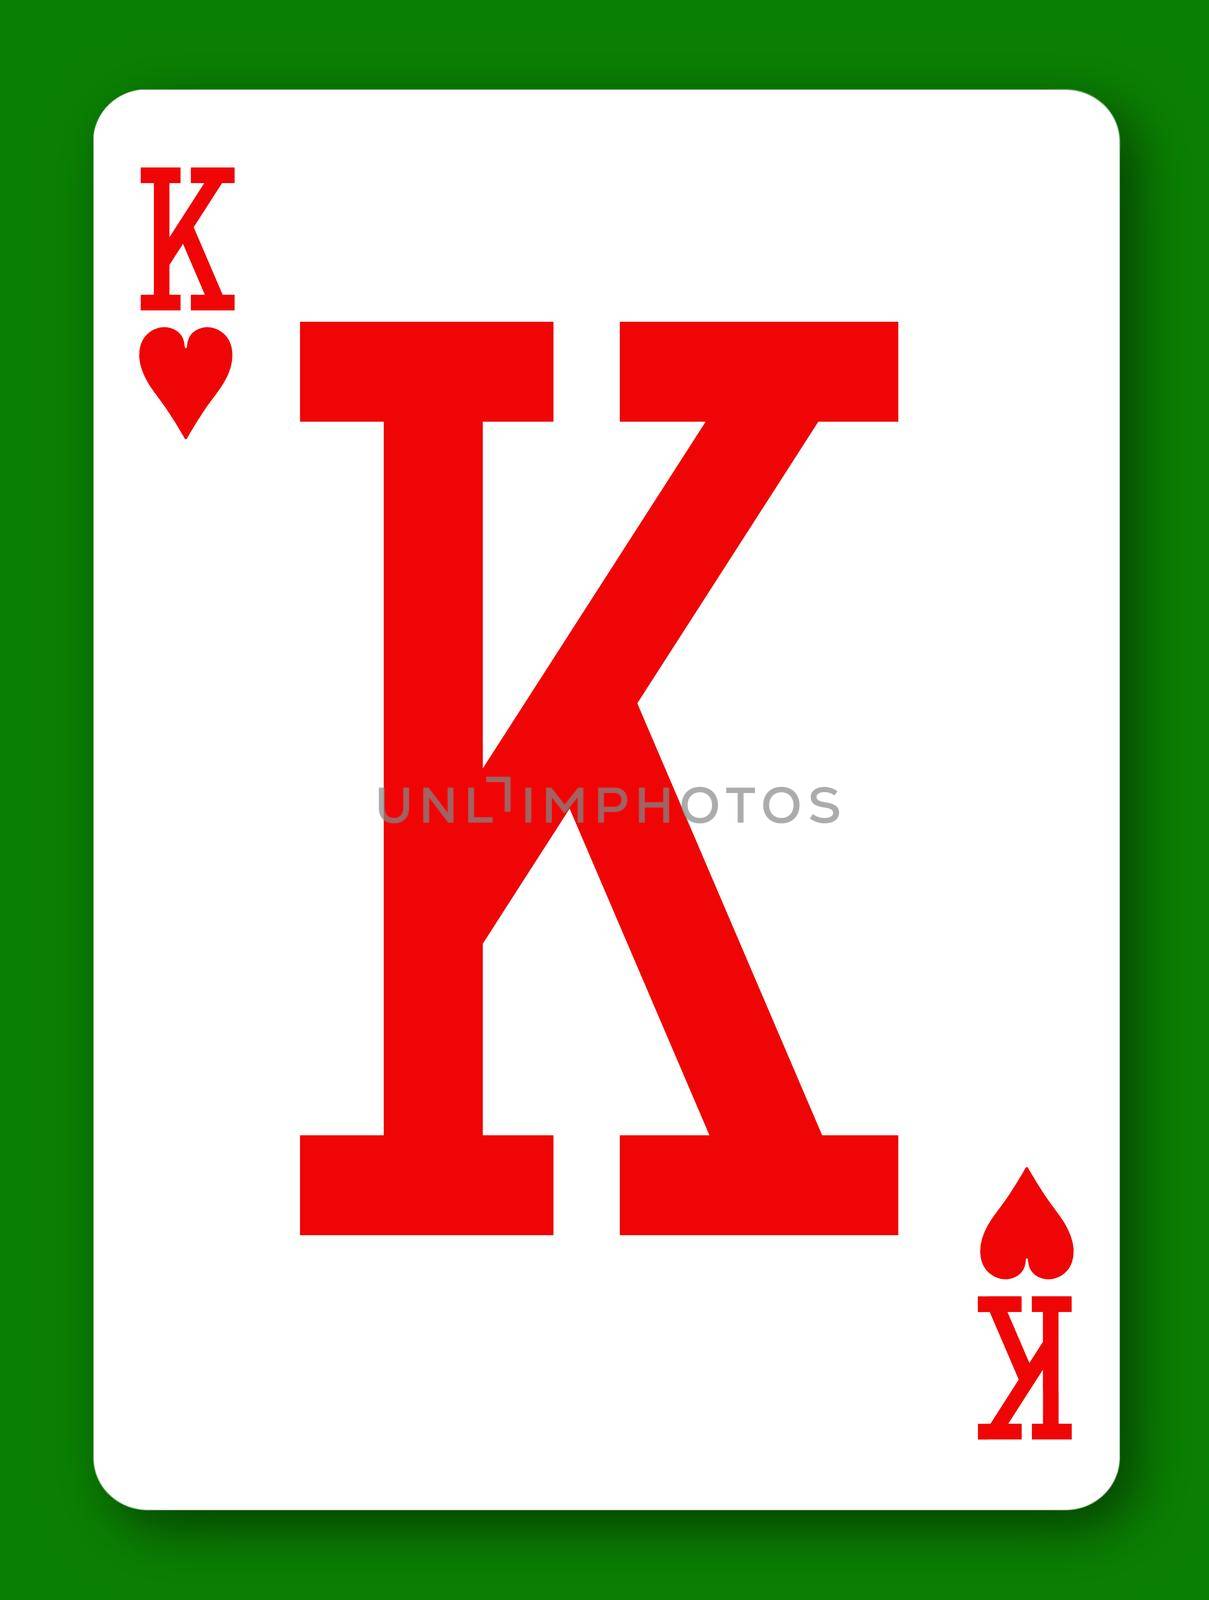 A King of Hearts playing card 3d illustration with clipping path to remove background and shadow